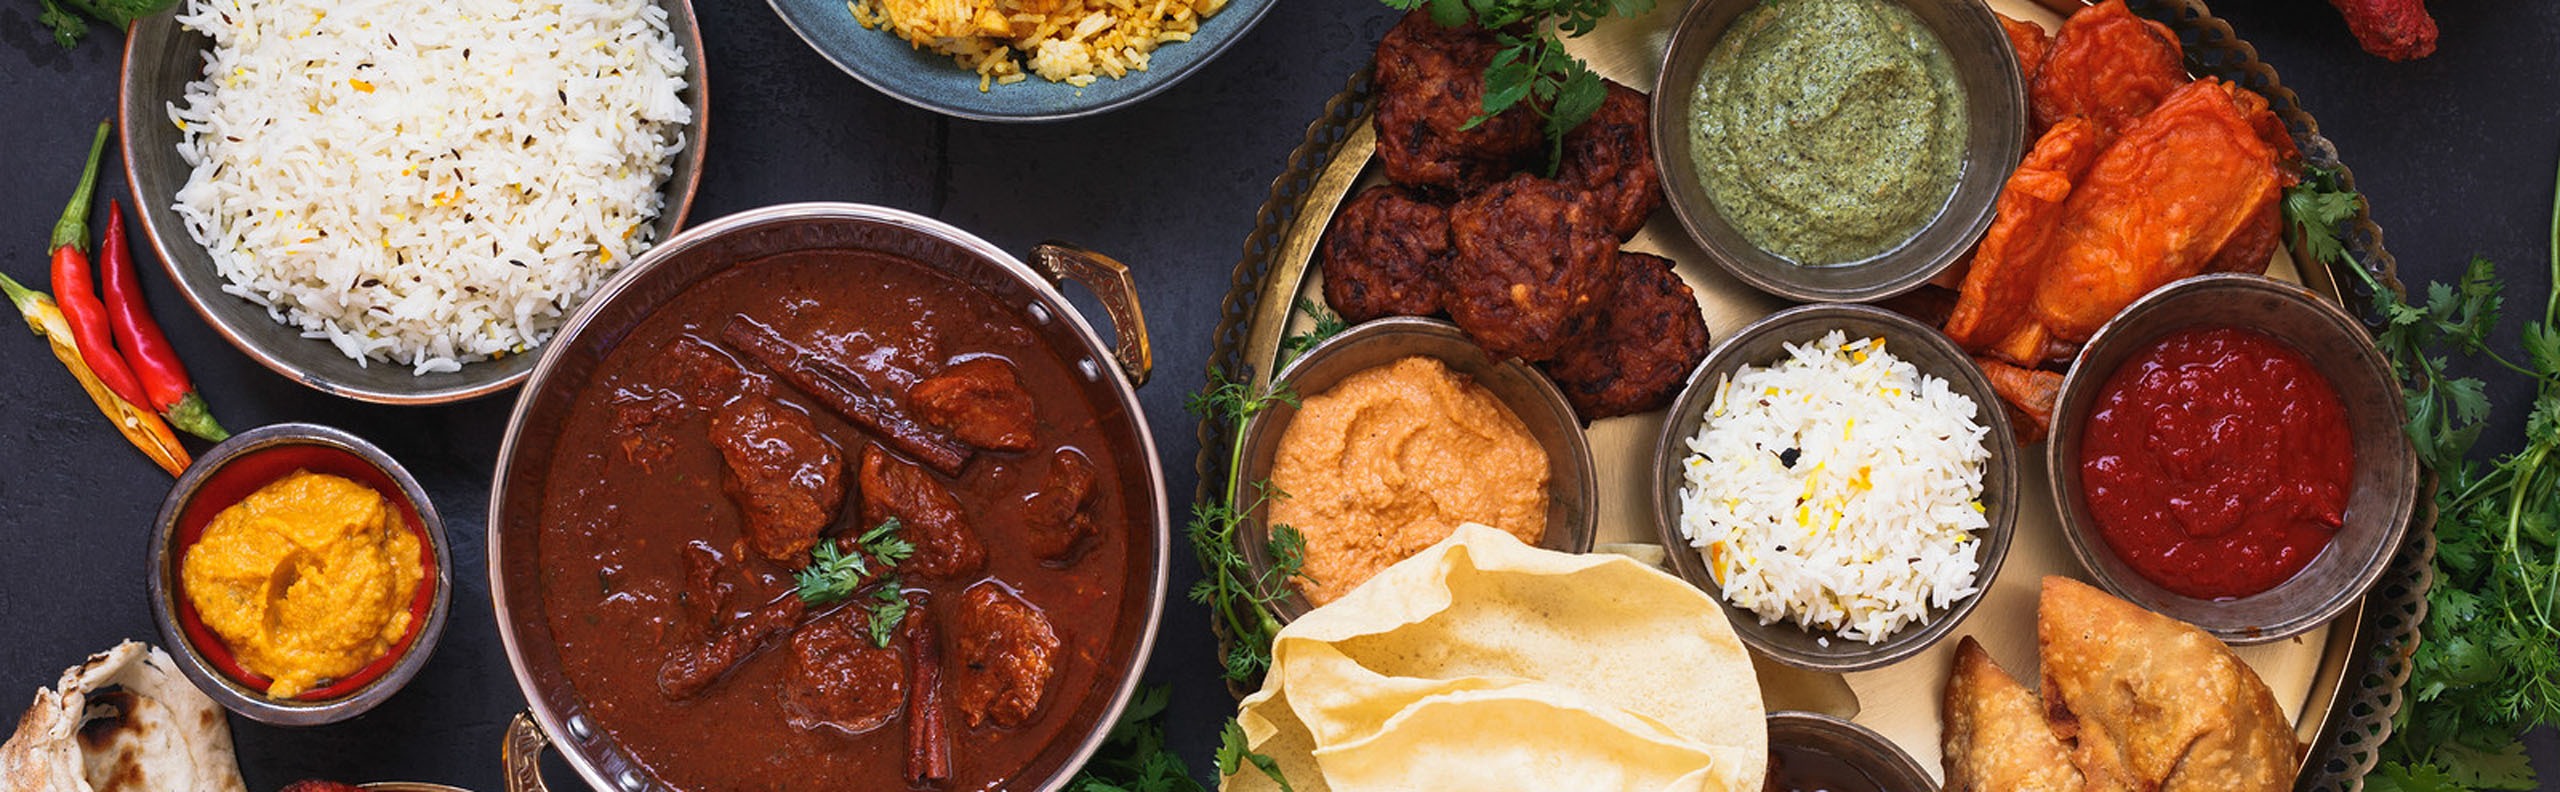 The One-Stop Guide to Indian Food